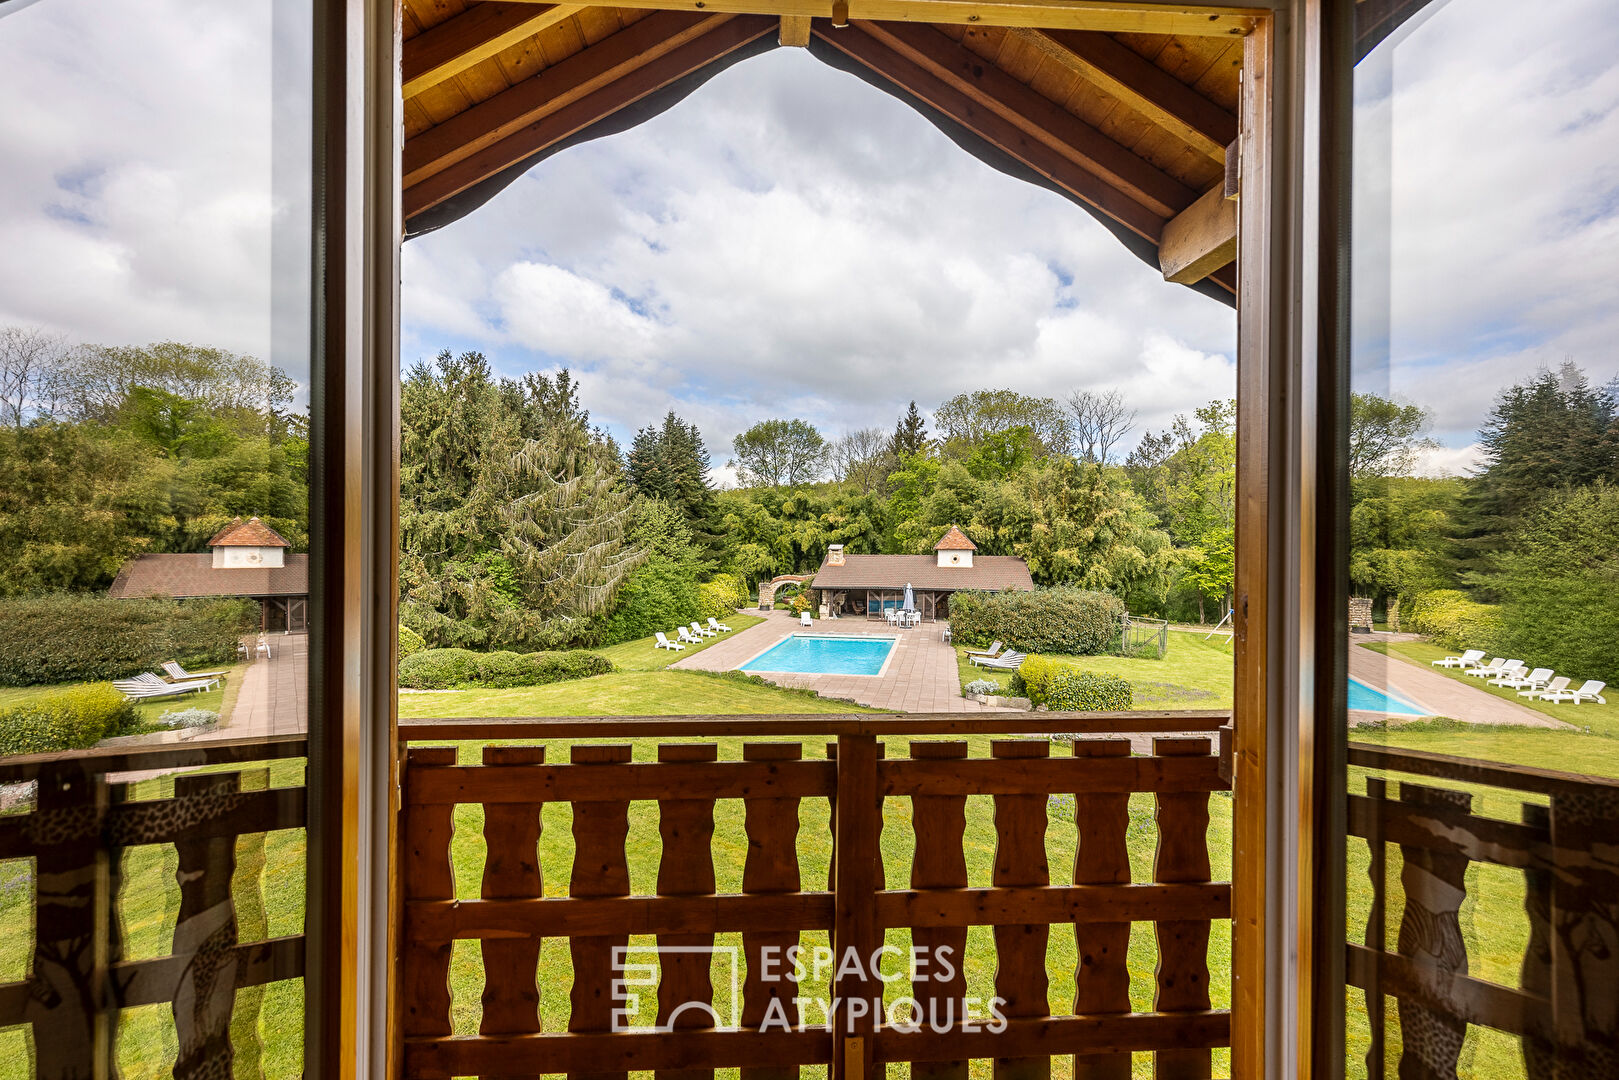 The incredible exceptional wooden property in its 2.8ha wooded park